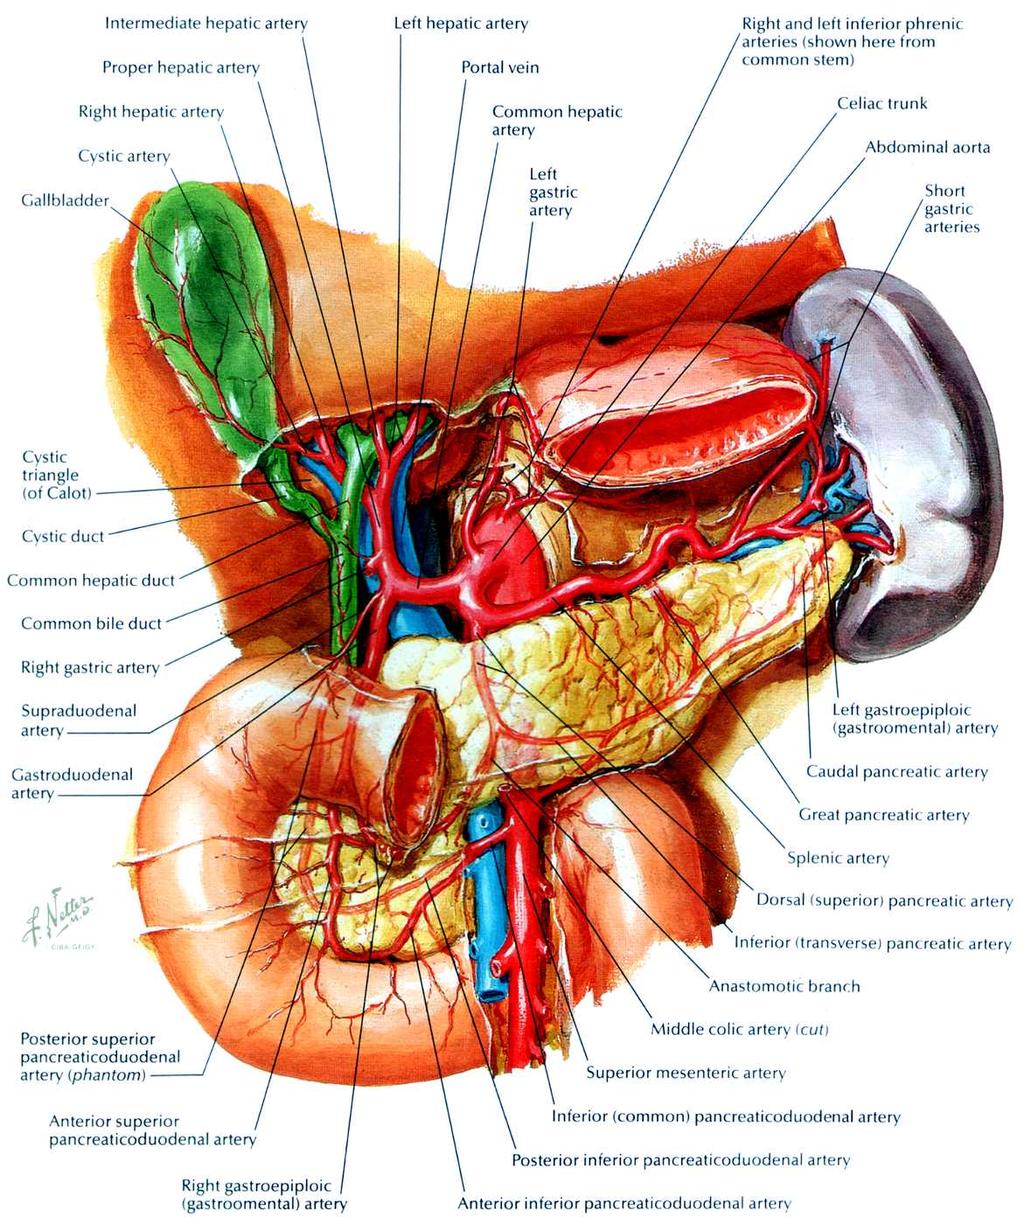 Anatomical Overview Peritoneal relations: visceral peritoneum passes over the gall bladder Blood supply From celiac axis Cystic artery to gall bladder Branch to peritoneal